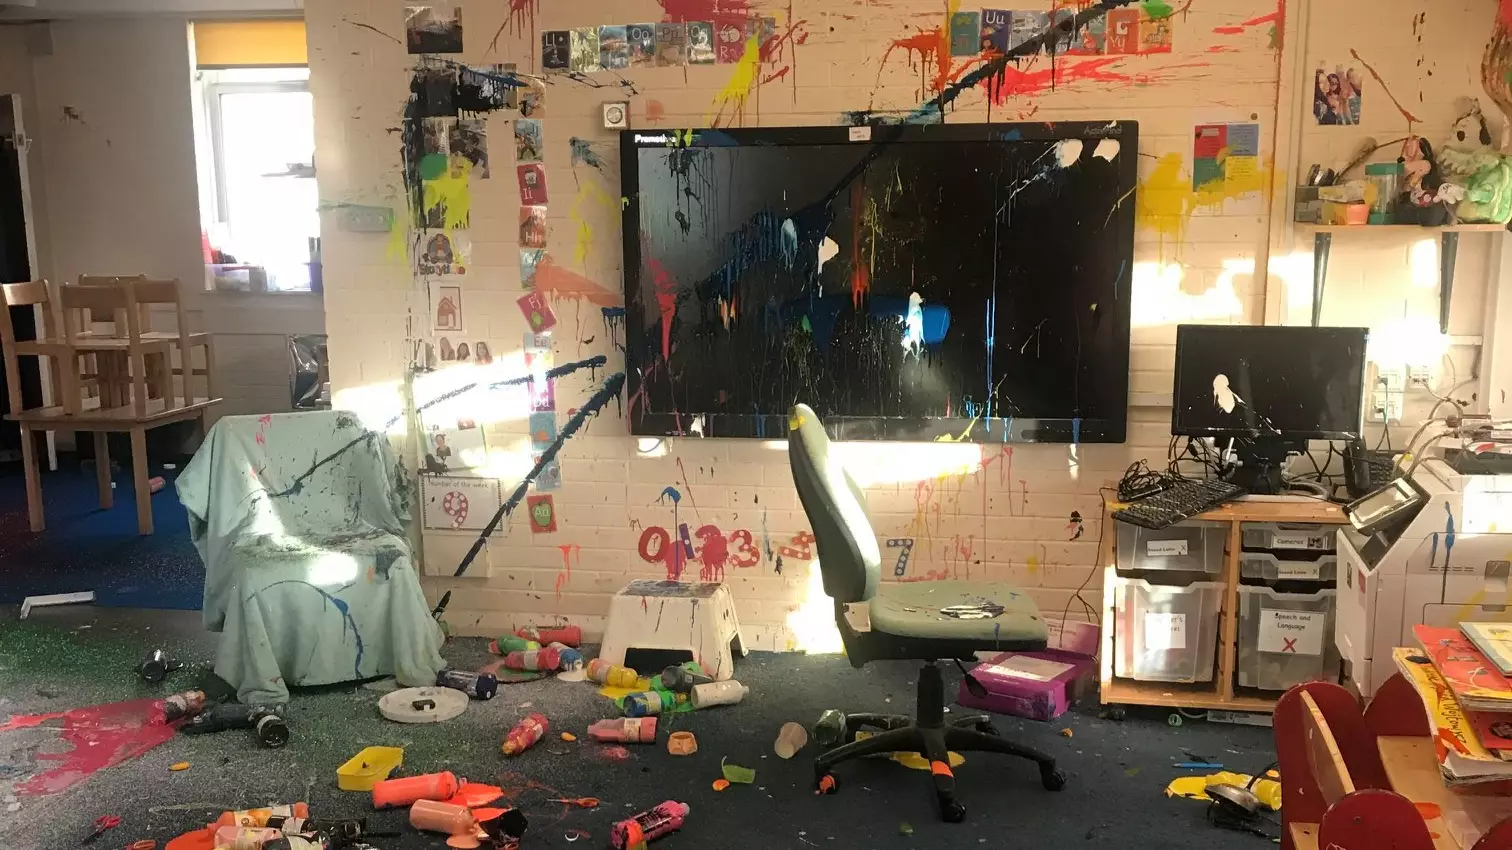 Vandals Cause Thousands Of Pounds Worth Of Damage To Portsmouth Nursery